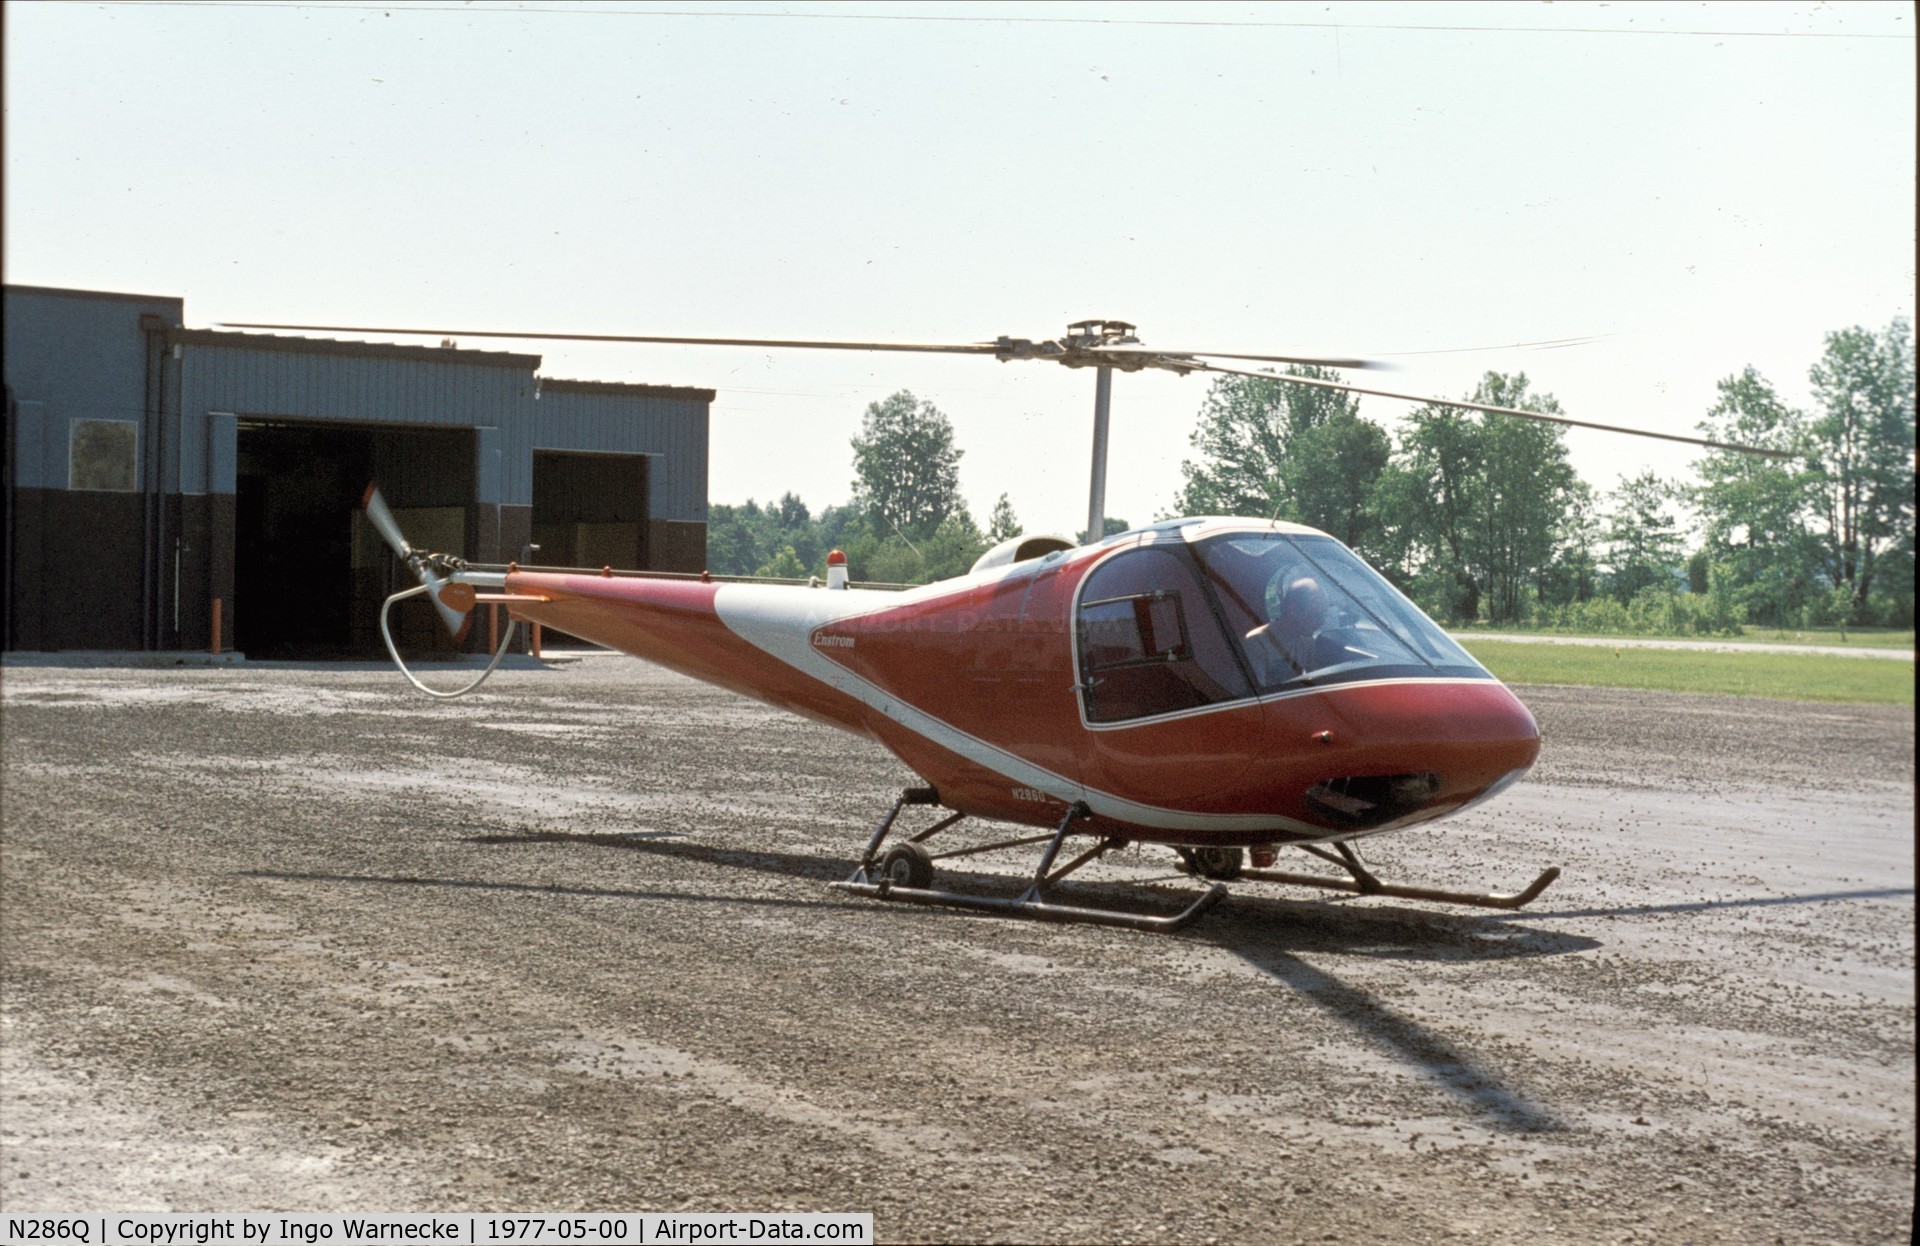 N286Q, 1975 Enstrom F-28A C/N 300, Enstrom F-28A at a small airfield in Indianapolis